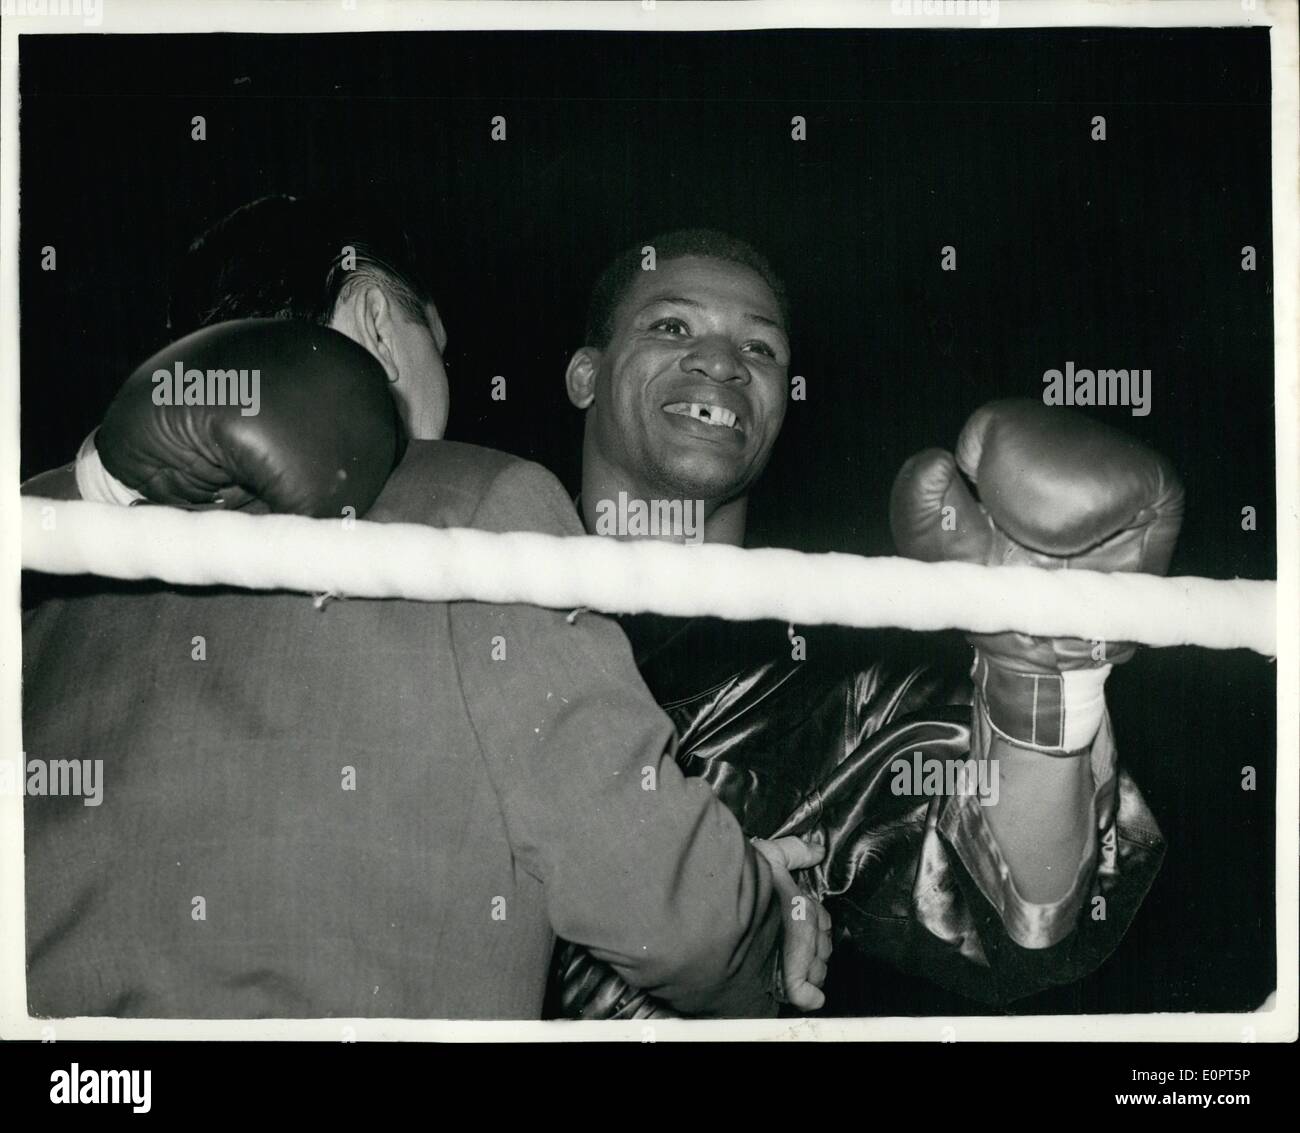 Feb. 02, 1957 - Nino Valdes knocks out Joe Erskine in first round. the hobby victor. Cuba's Nino Valdes beat Joe erdkine of Cardiff by a N.O. In the first round of their 10 round contest at earl's court last night. photo shows Nino Valdes with the smile of victory on his - after his sensational defeat of Joe erakine last night. Stock Photo